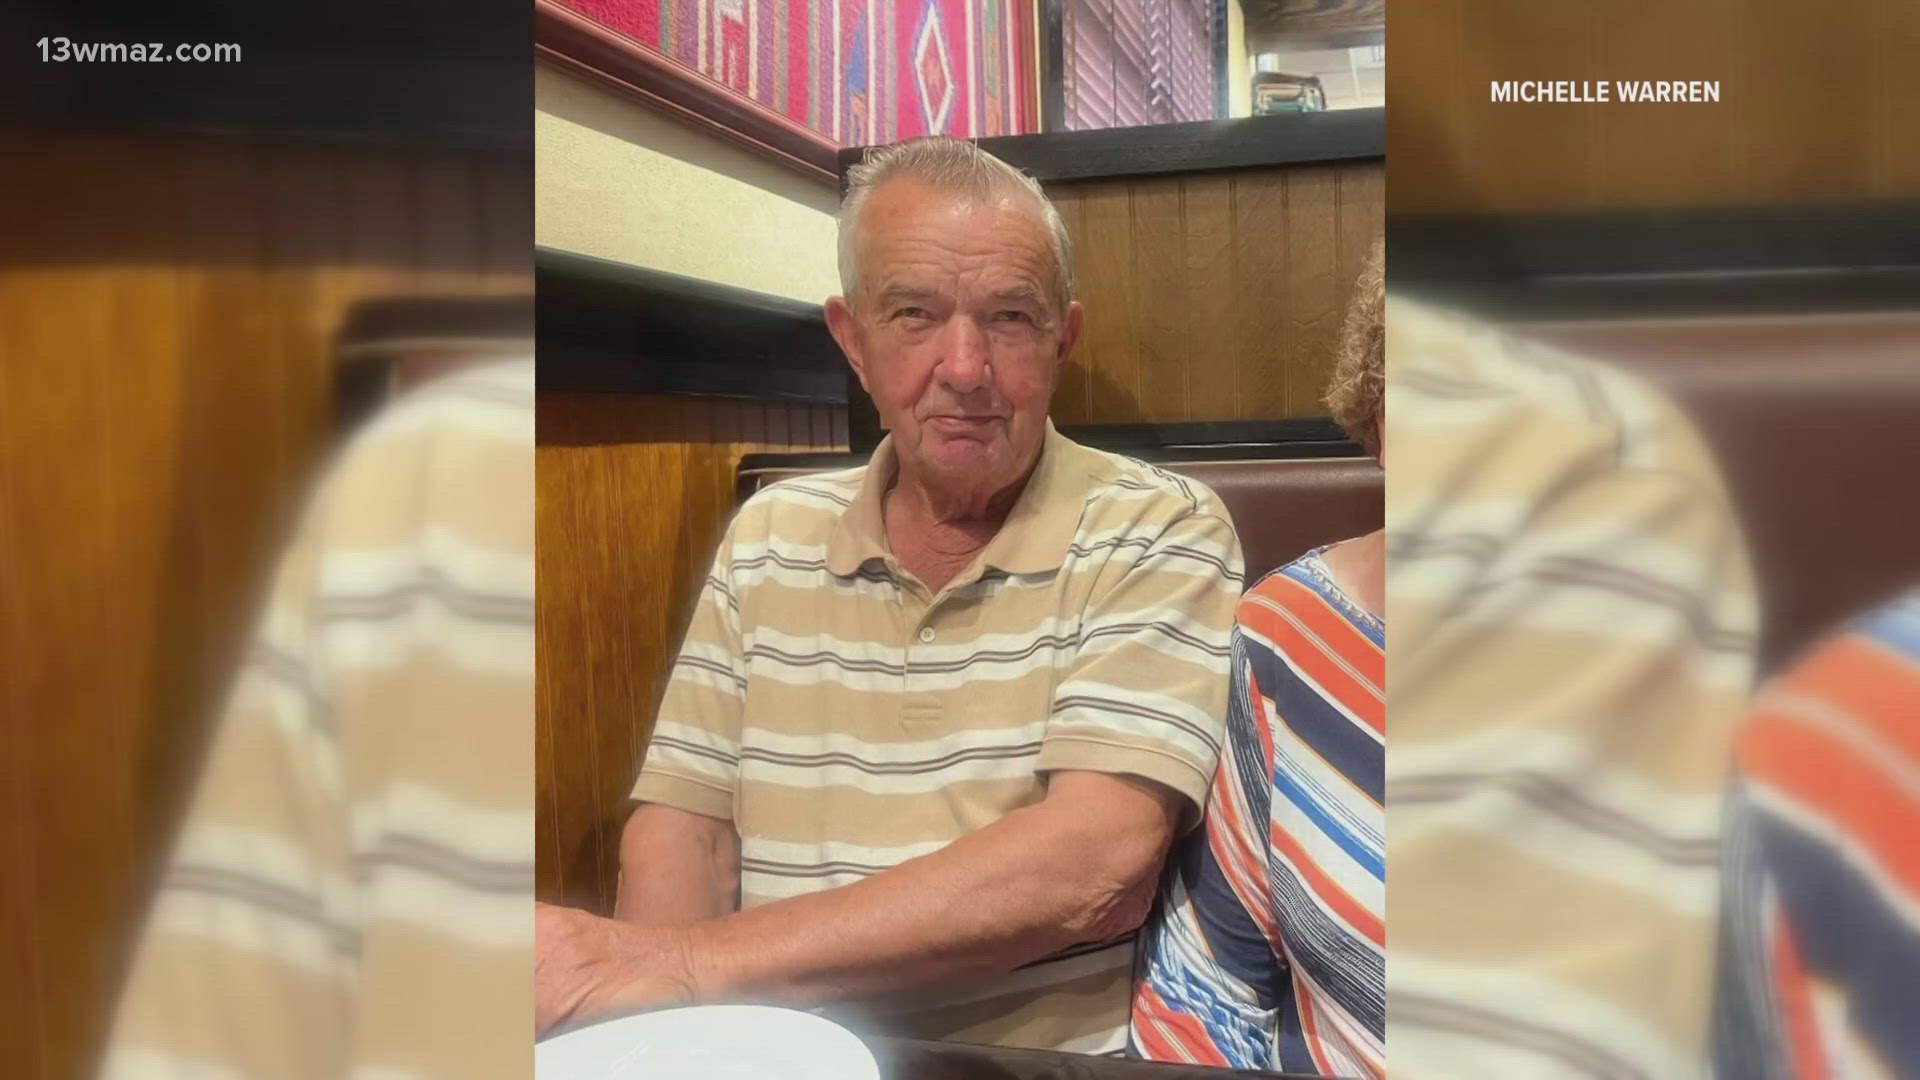 It comes over two weeks after Garland Warren, 82, was last seen in Roberta. His family says he had dementia.